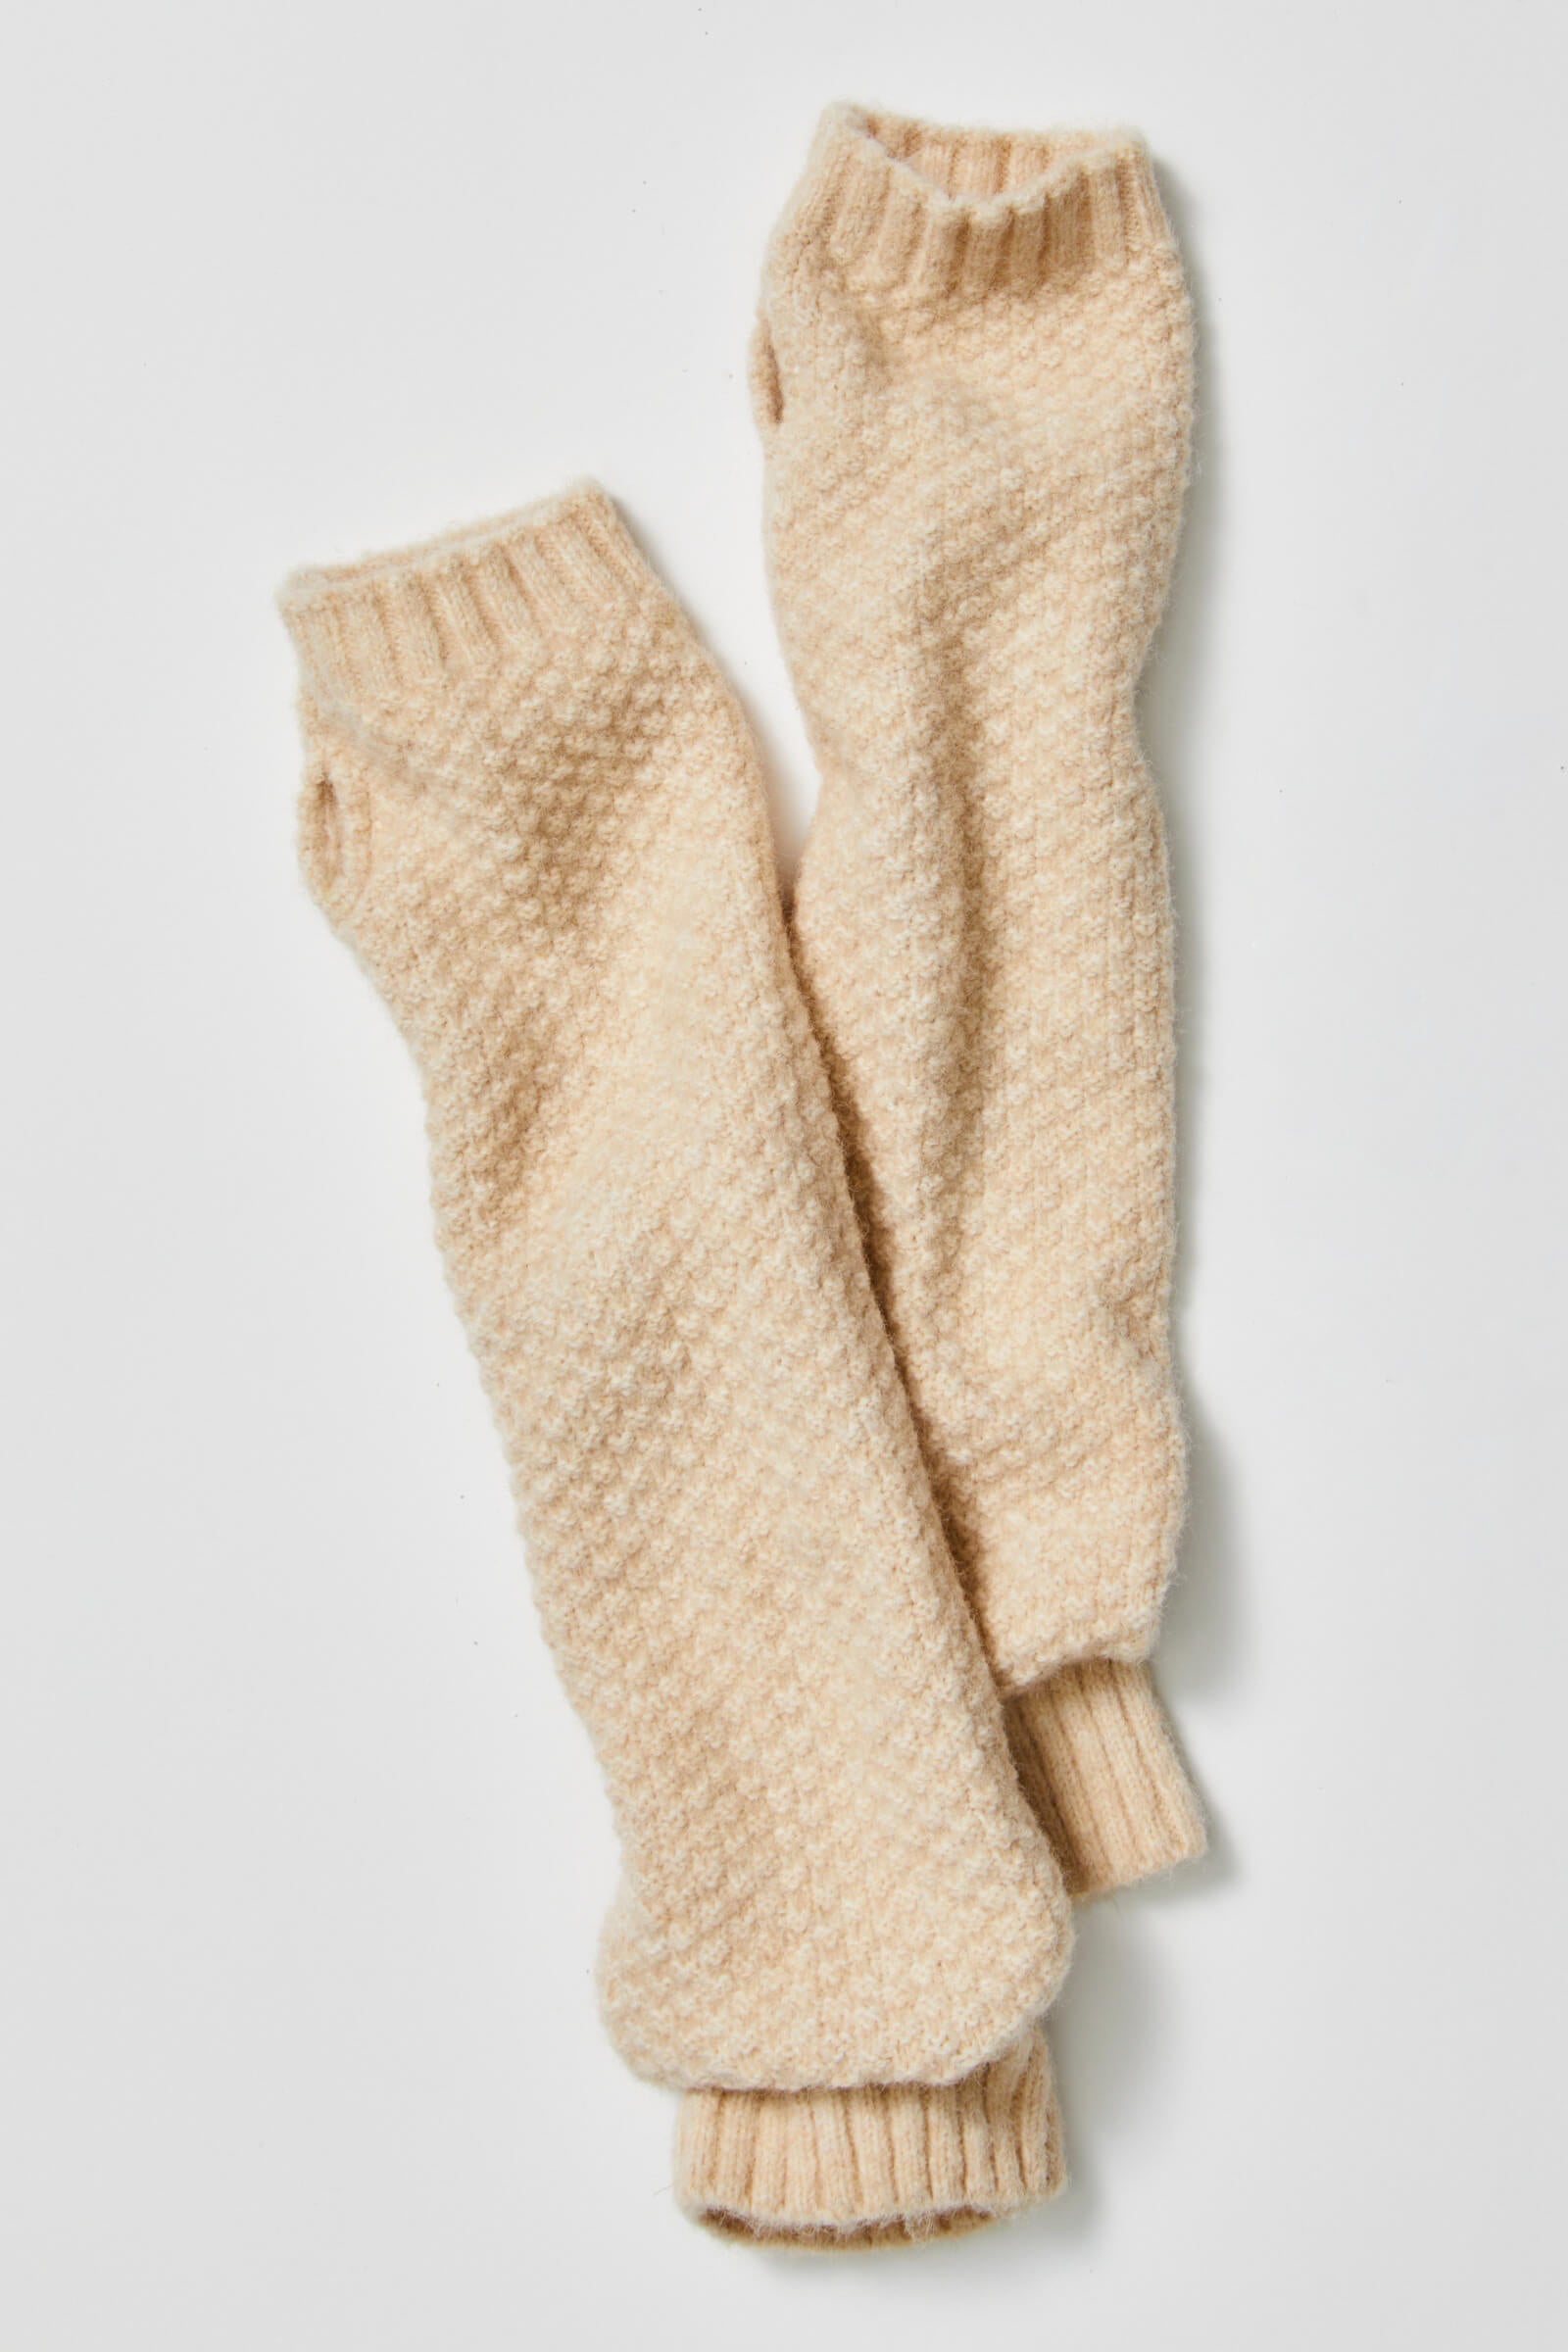 armour knit armwarmers